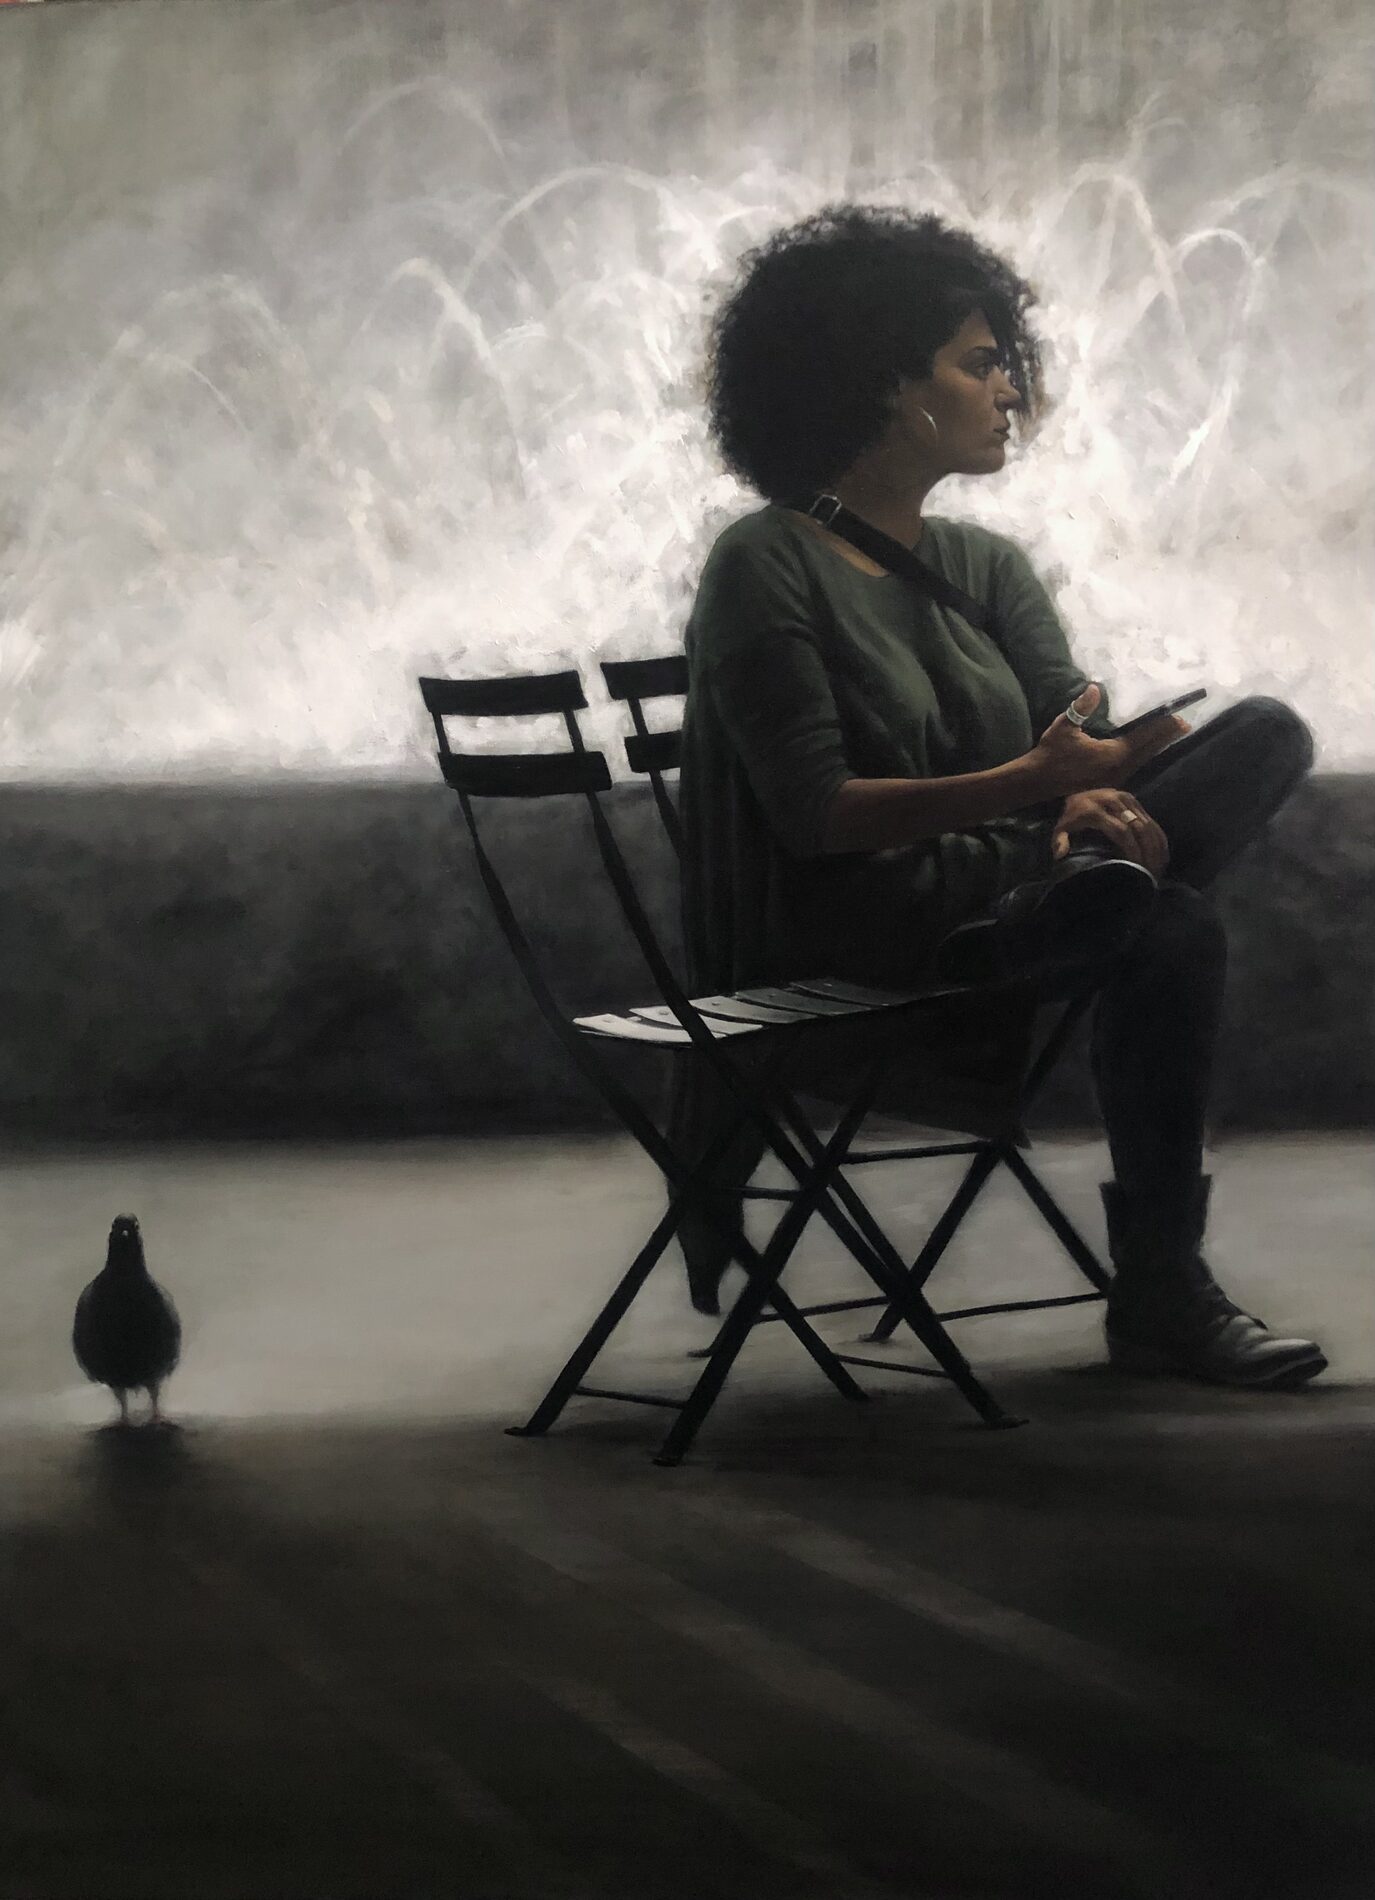 A painting of a woman sitting in a chair outside with her phone, a pigeon next to her.